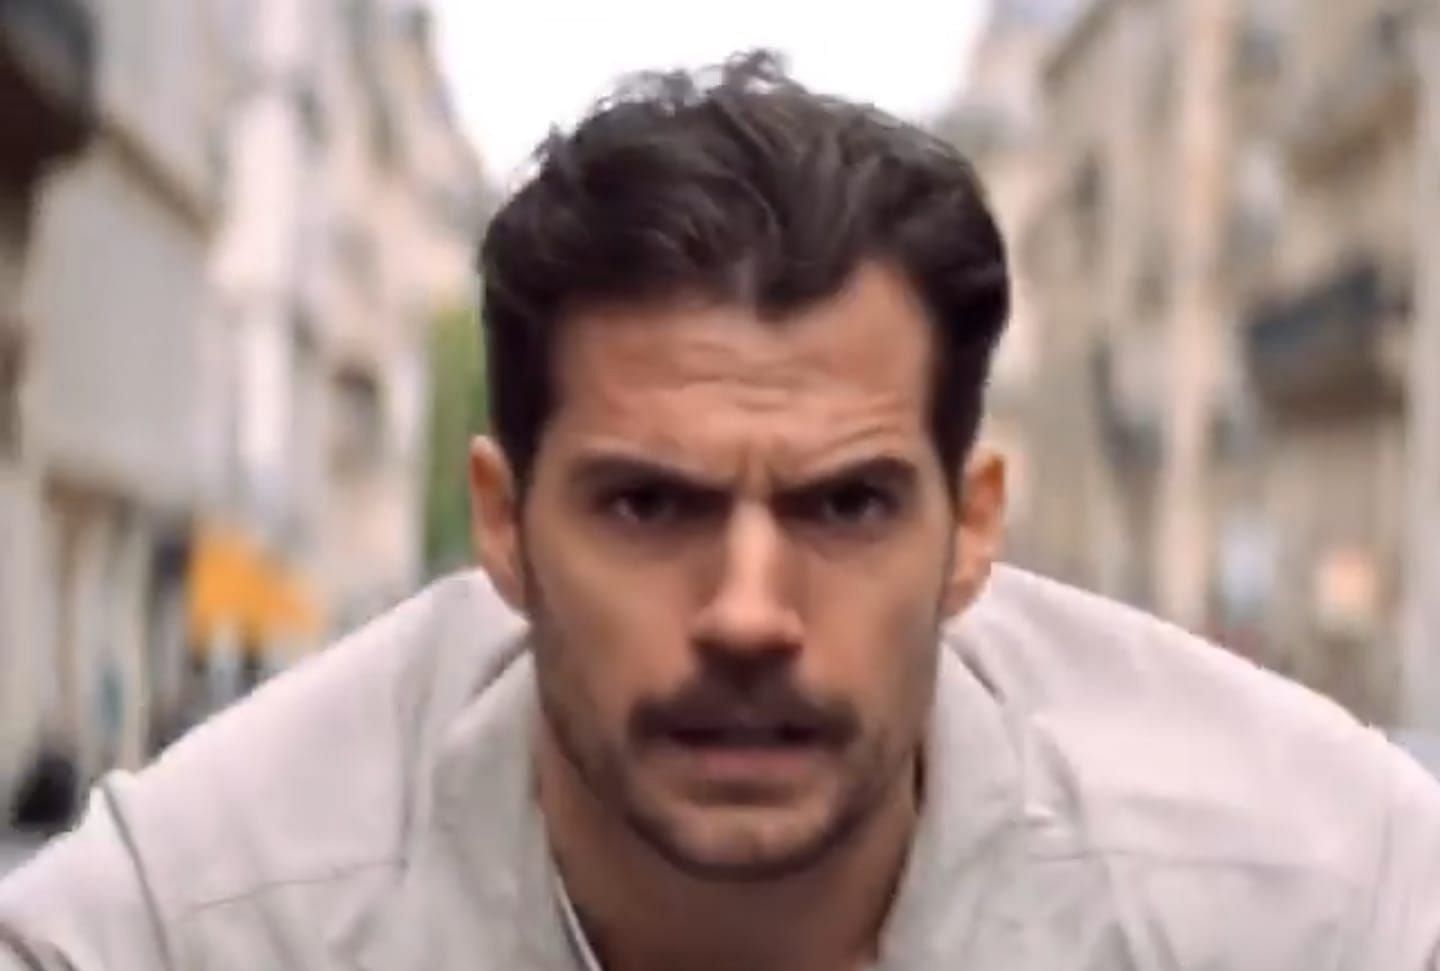 Henry Cavill Mission: Impossible - Fallout